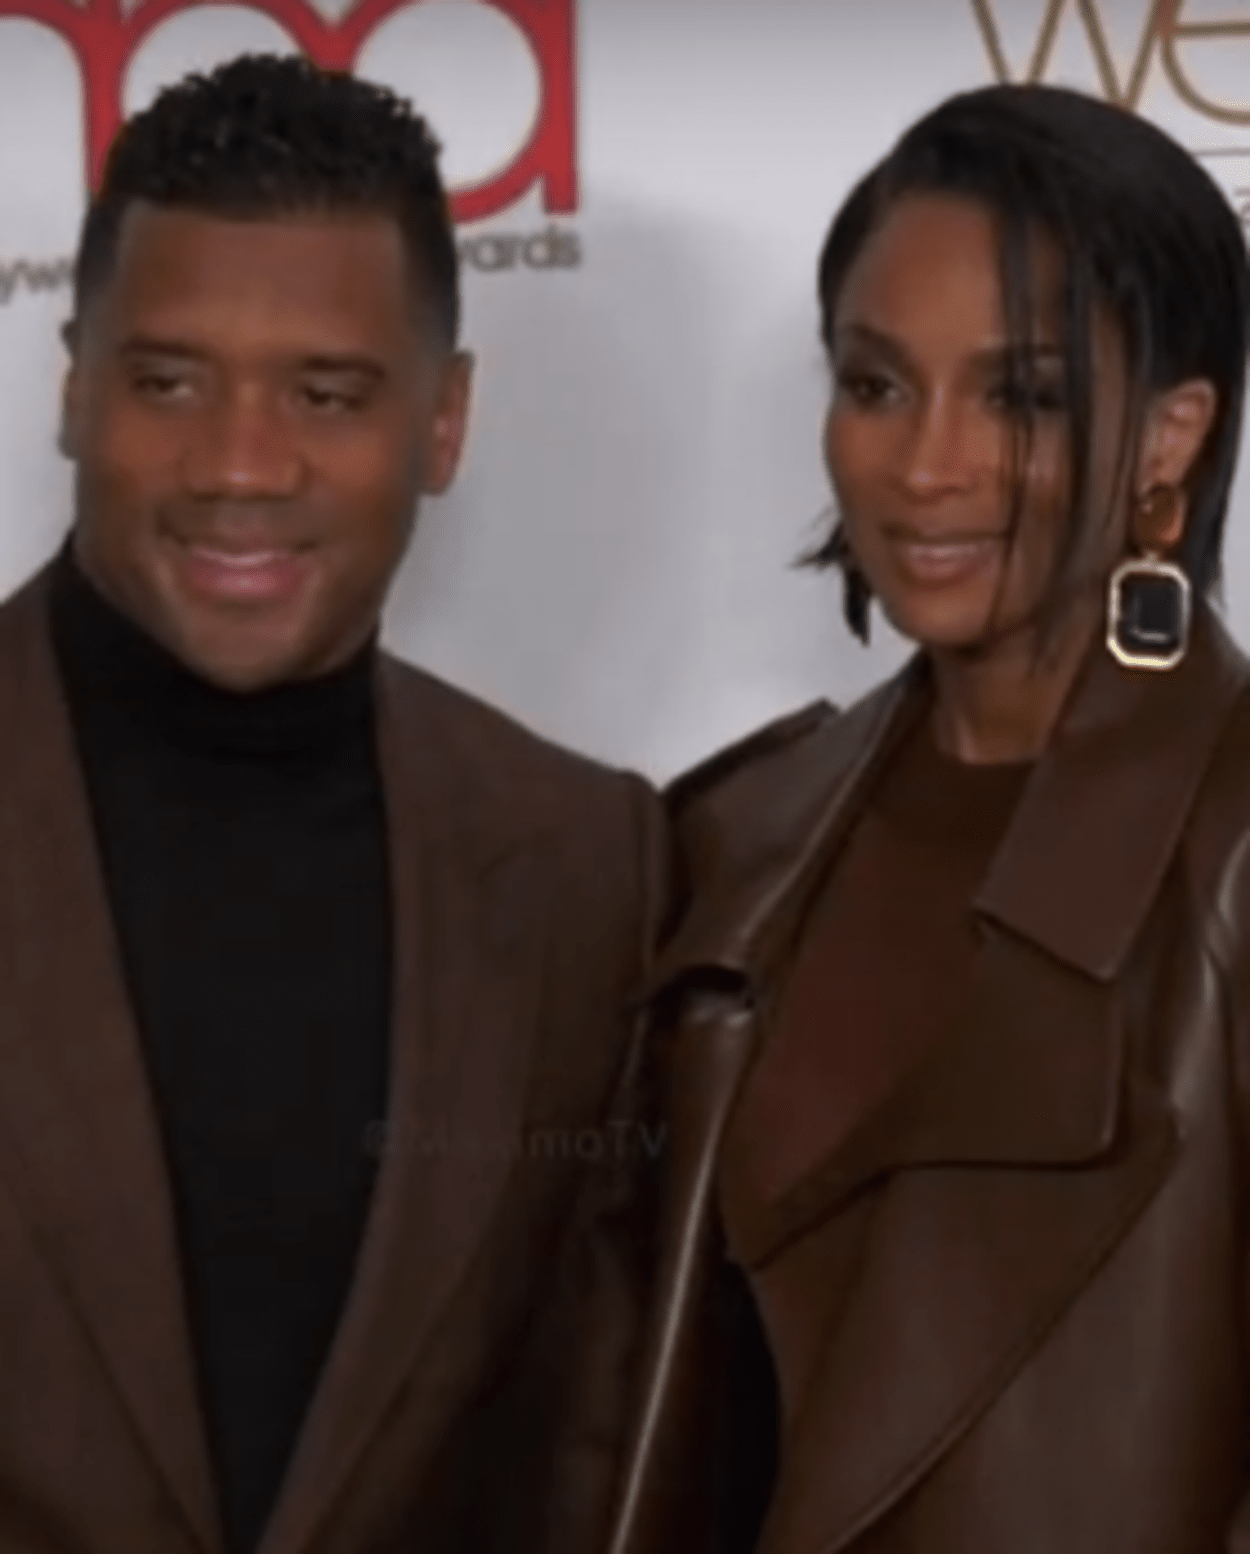 Where Do Russell Wilson And Ciara Live? (Location)